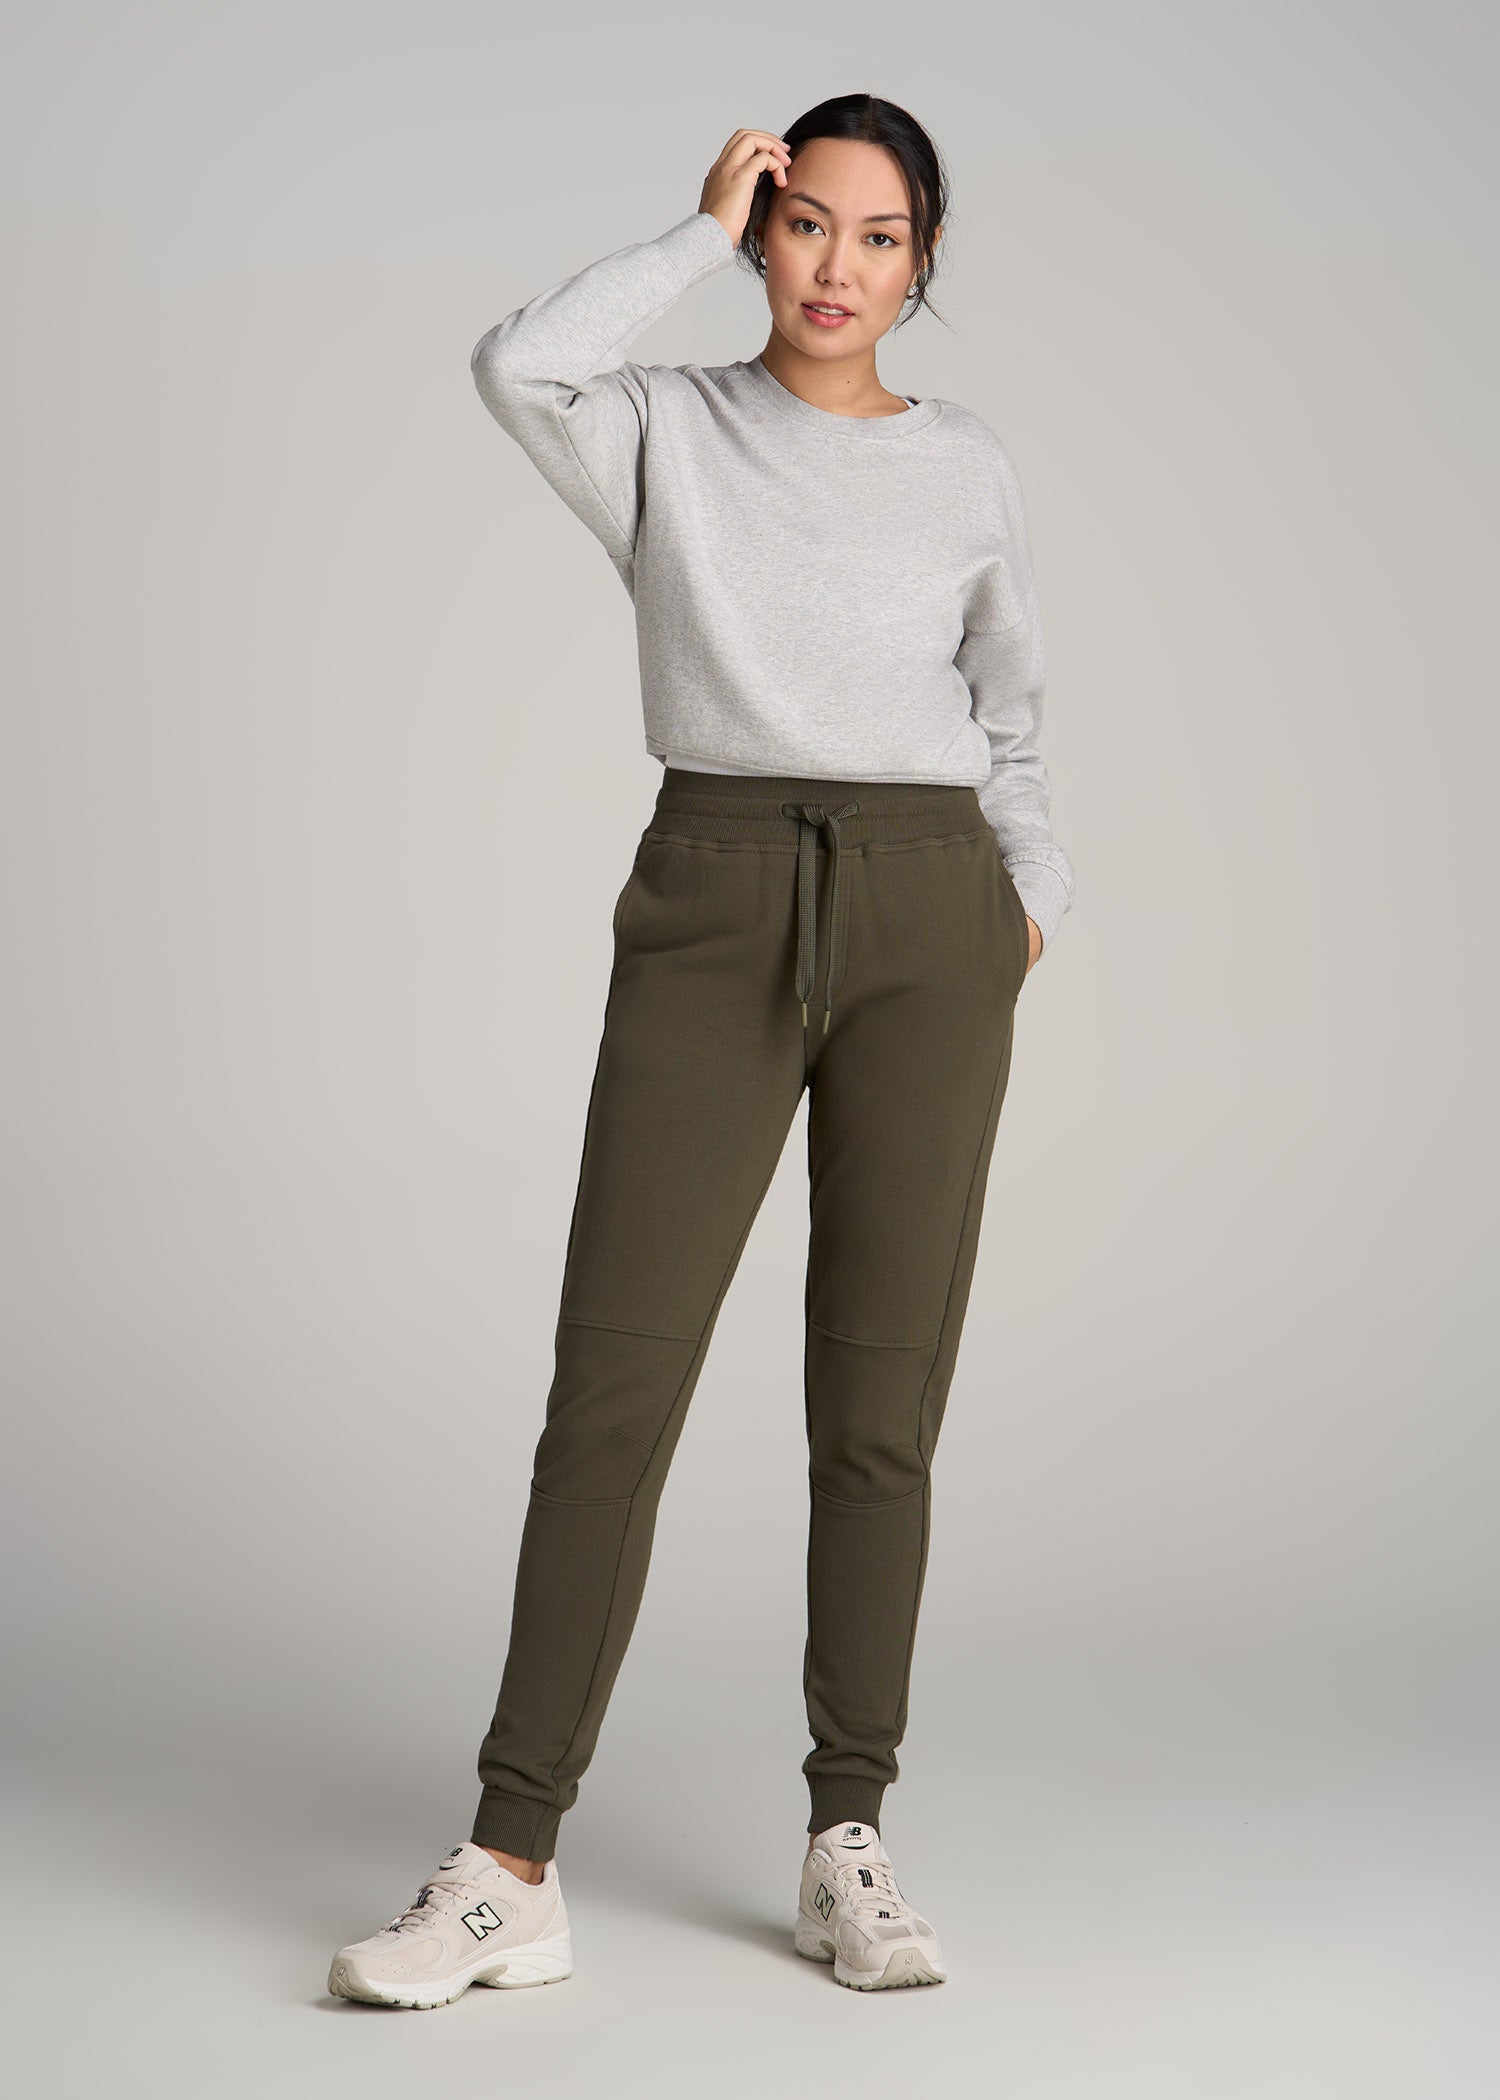 Wearever French Terry Tall Women's Joggers in Charcoal